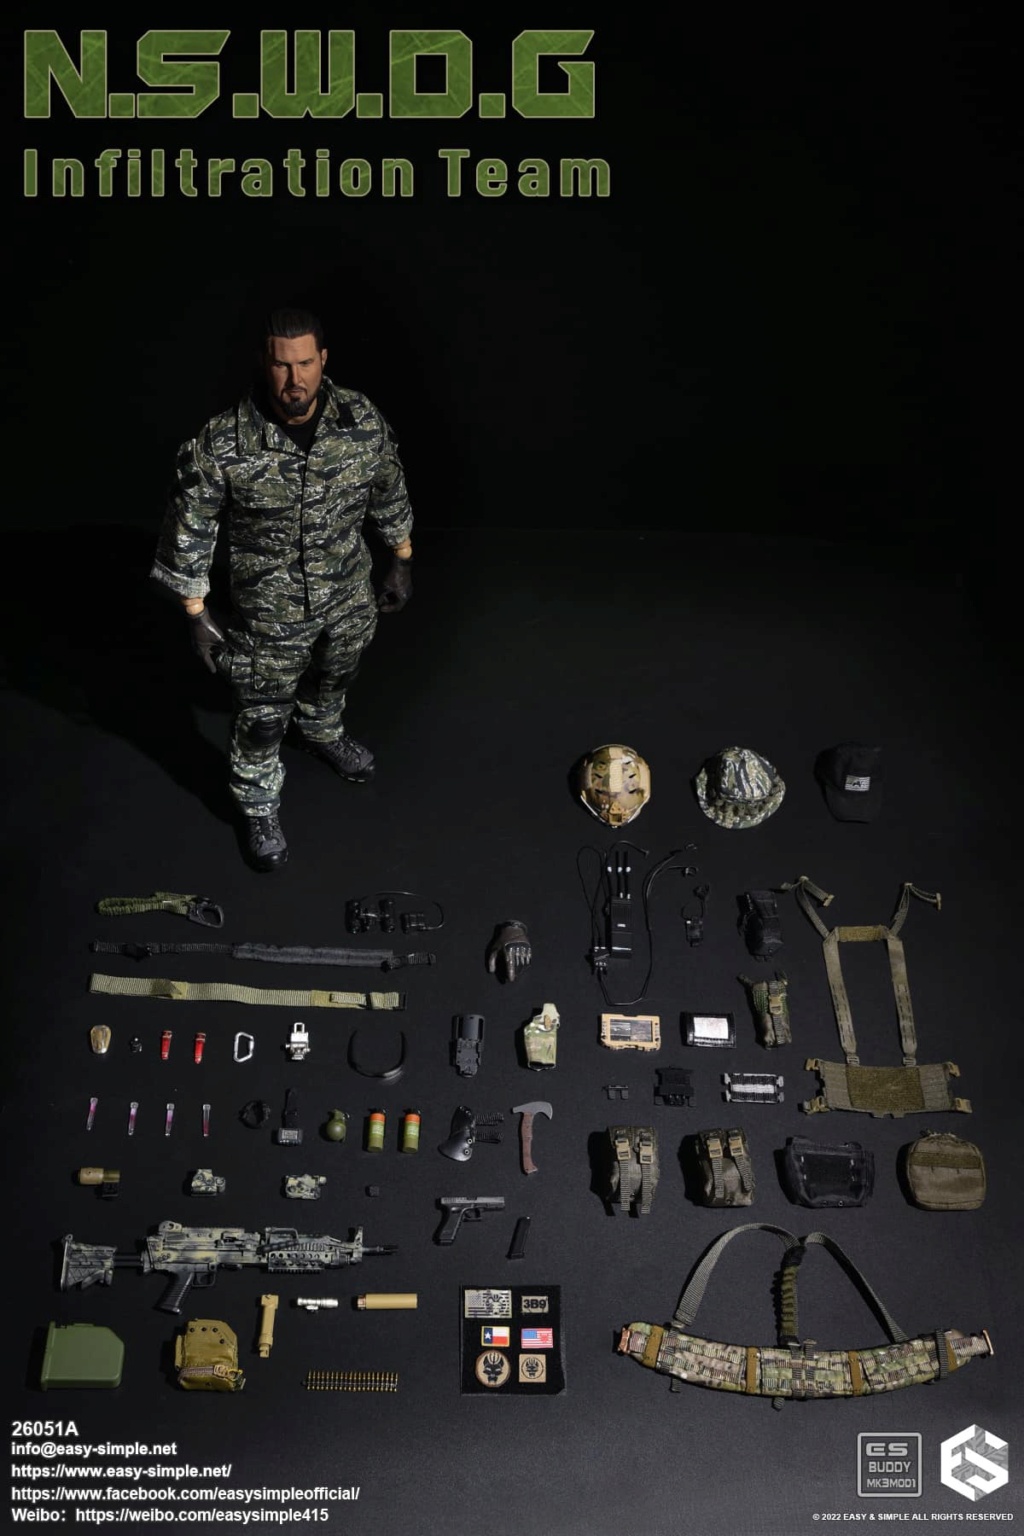 NSWDG - NEW PRODUCT: EASY AND SIMPLE 1/6 SCALE FIGURE: N.S.W.D.G INFILTRATION TEAM - (2 Versions) 44115